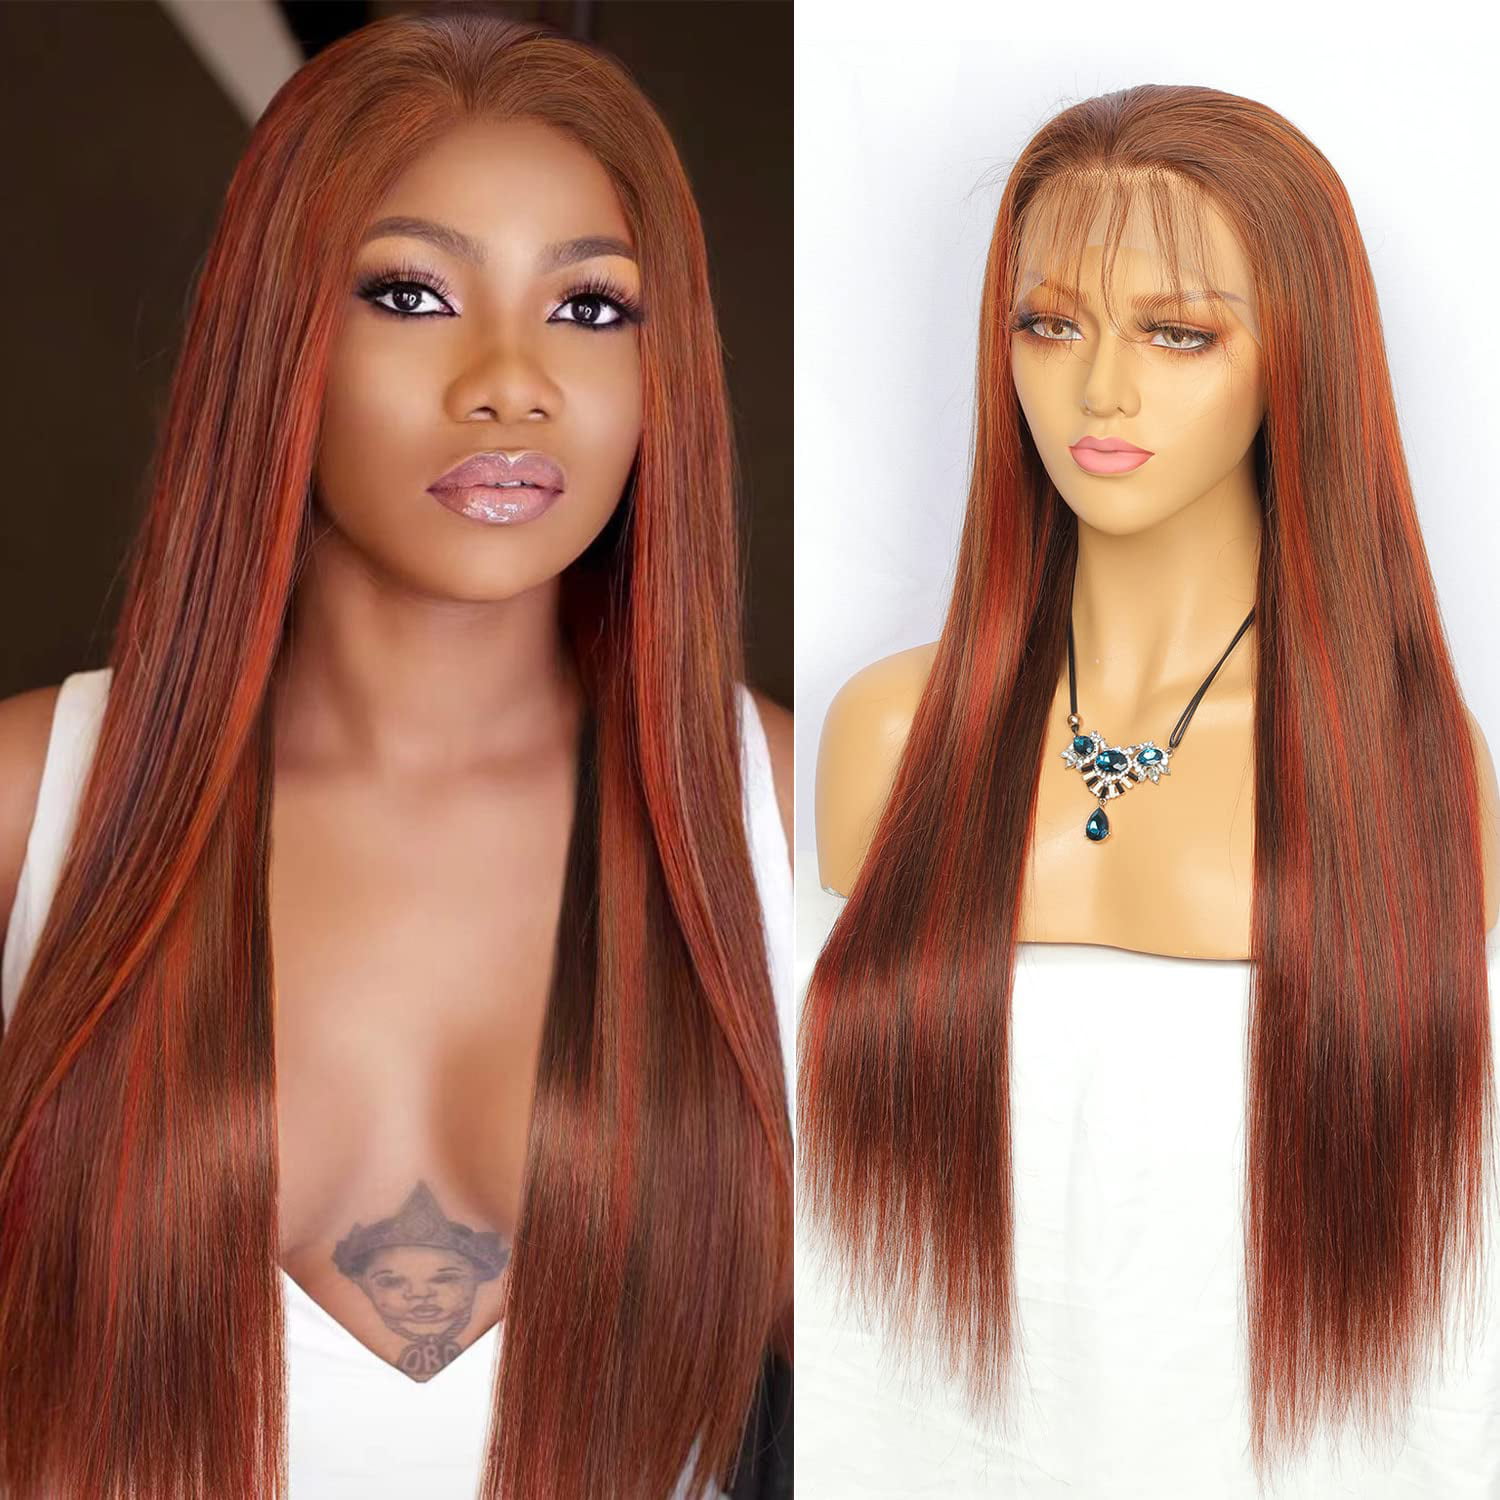 Ginger And Copper Red Wigs Human Hair for Black Women Highlight P4/350 Color  13x6 Ombre Straight Lace Front Wigs Human Hair Pre Plucked with Baby Hair  180% Brazilian Remy Hair 28 Inch -